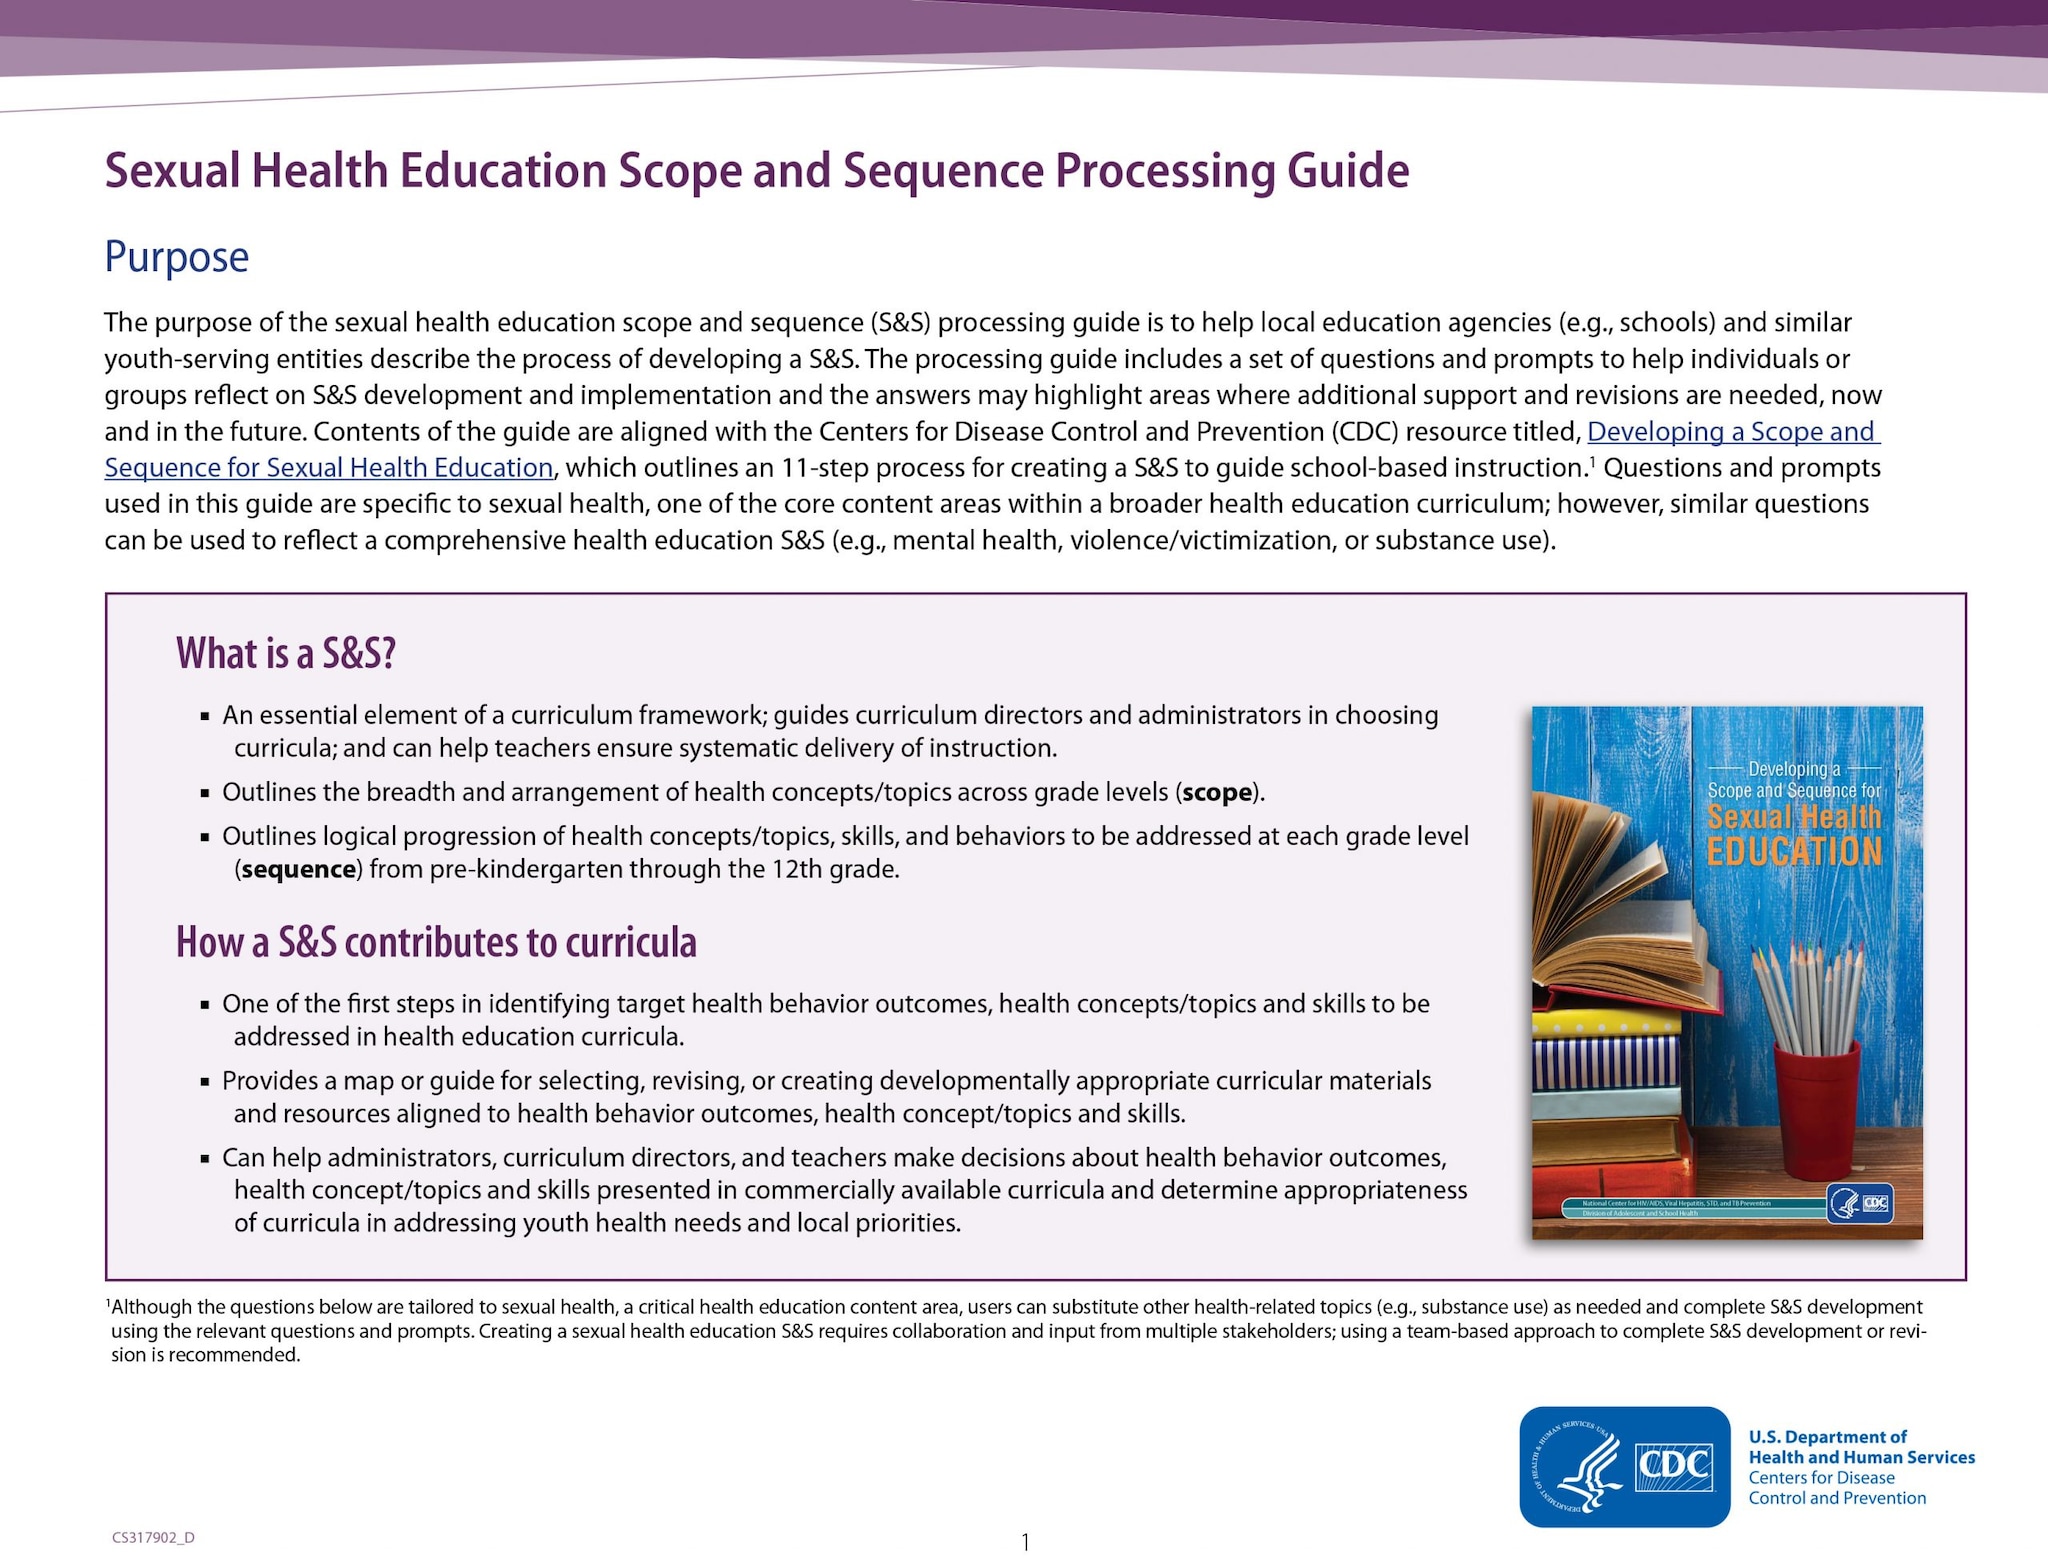 Sexual Health Education Scope and Sequence Processing Guide fact sheet cover